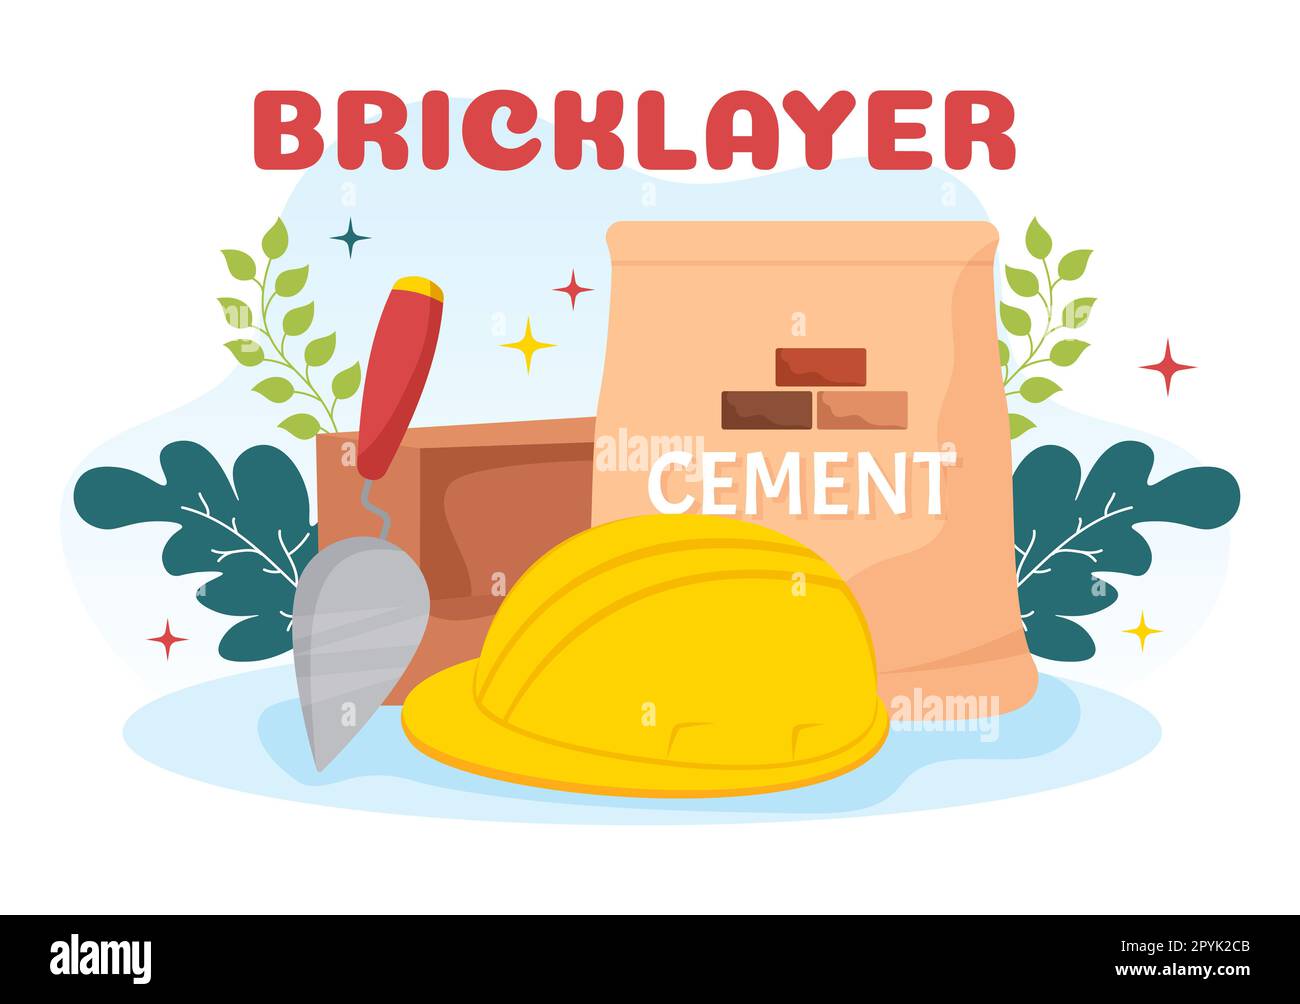 Bricklayer Worker Illustration with People Construction and Laying Bricks for Building a Wall in Flat Cartoon Hand Drawn Landing Page Templates Stock Photo